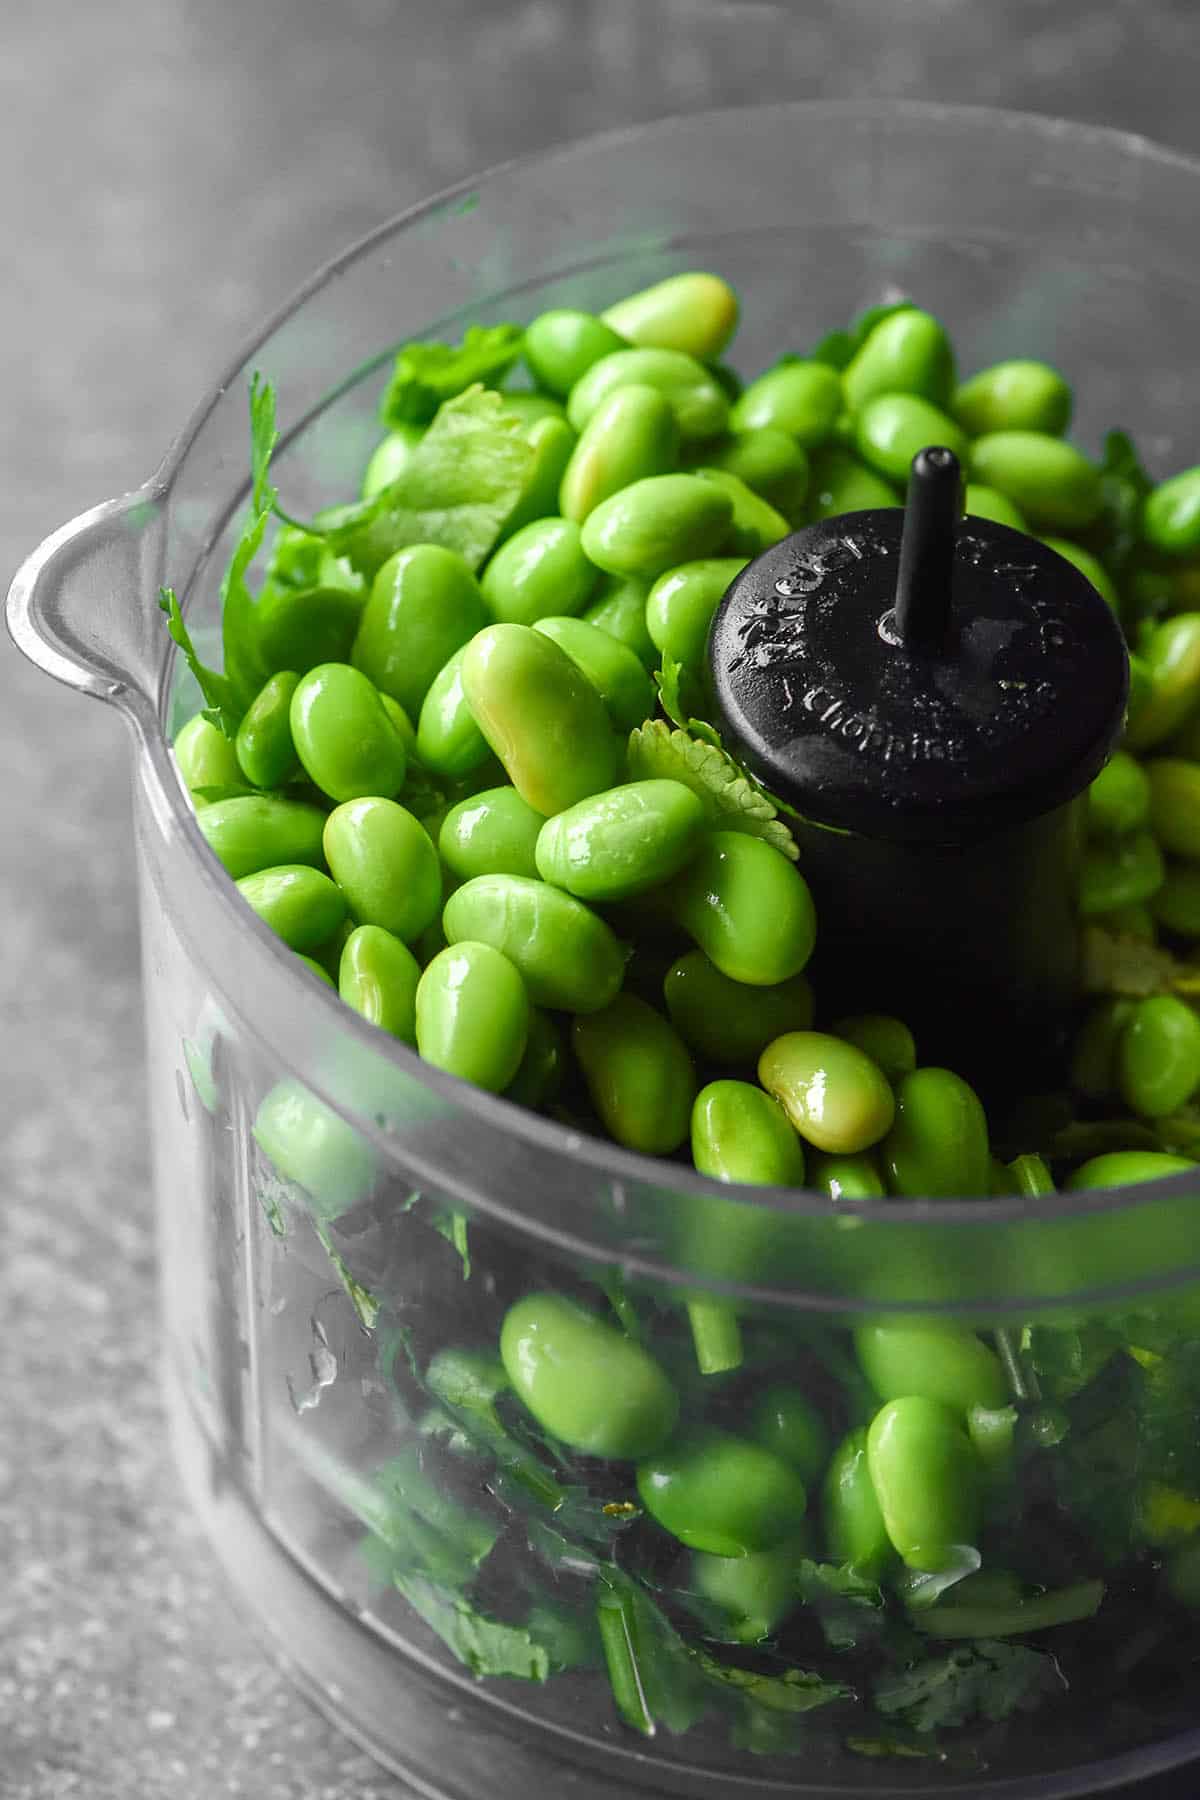 A macro image of edamame beans and herbs in a mini food processor against a grey backdrop